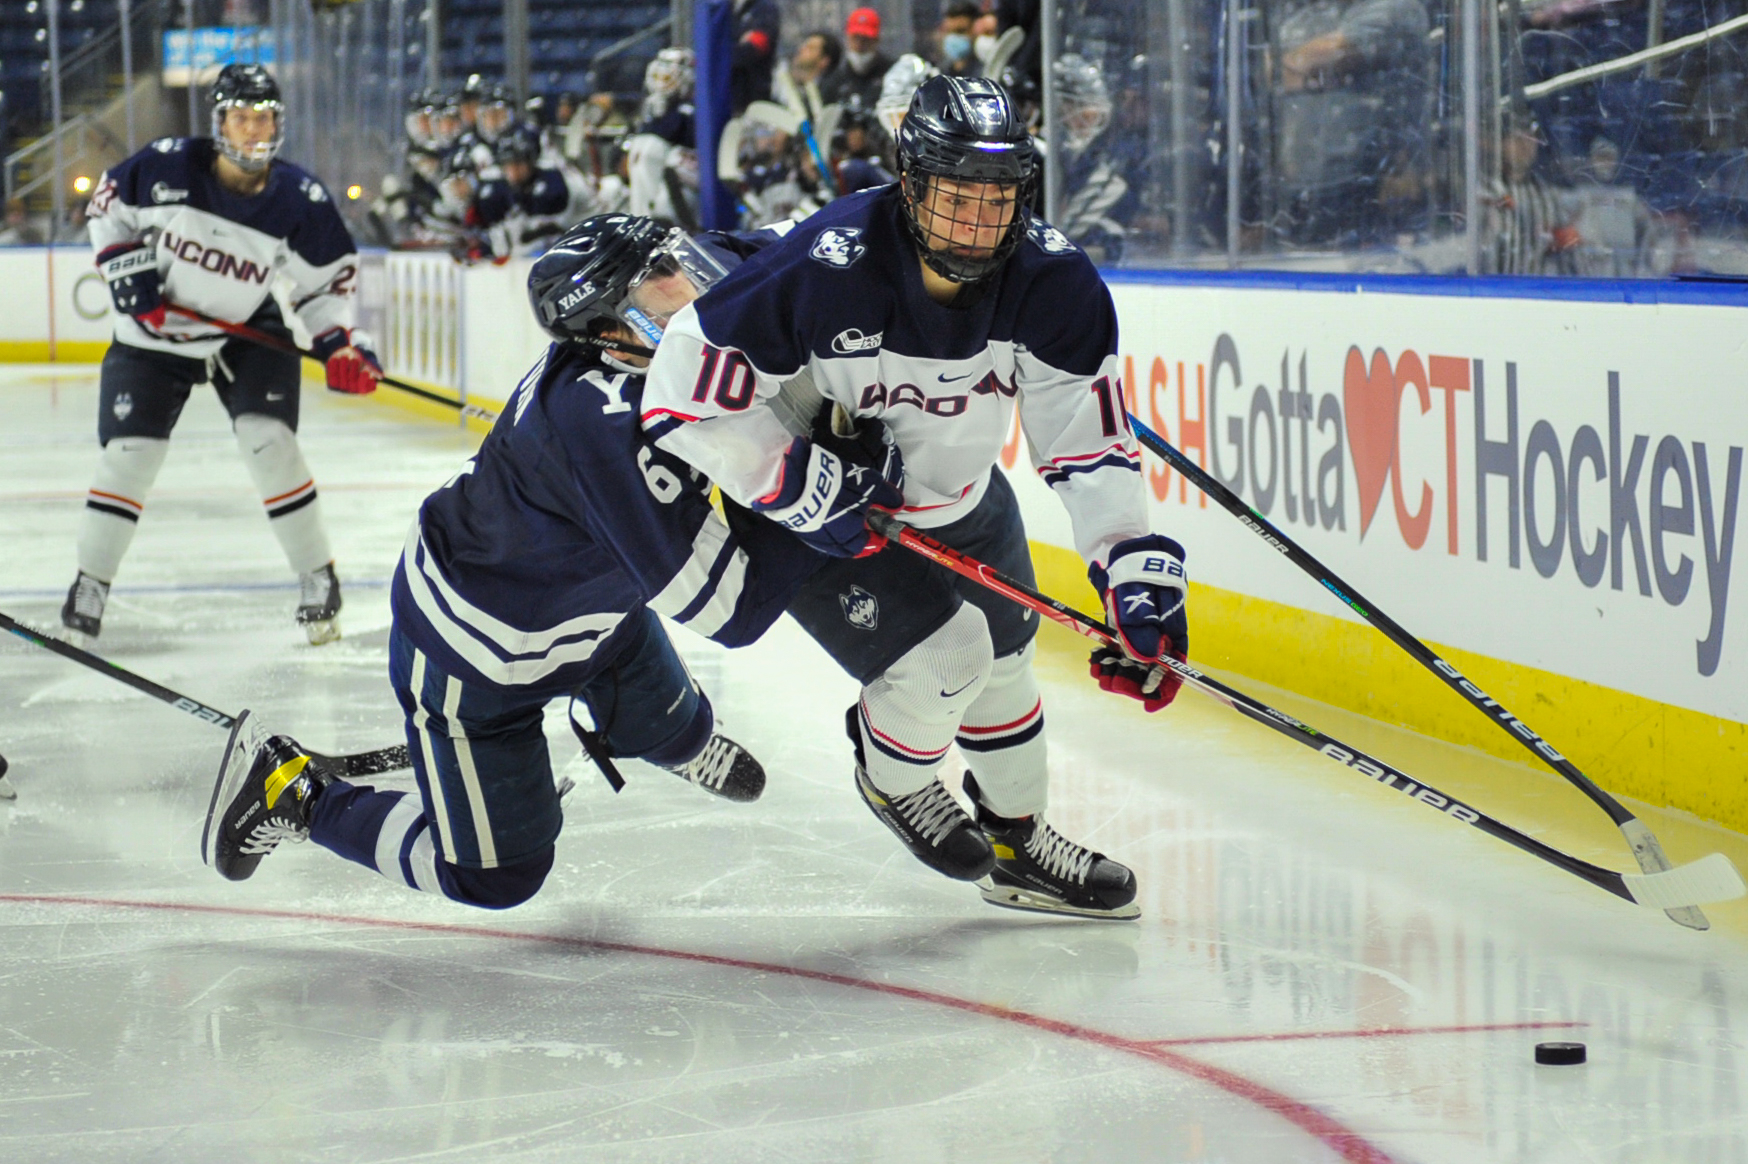 UConn Blasts Yale in CT Ice Opener